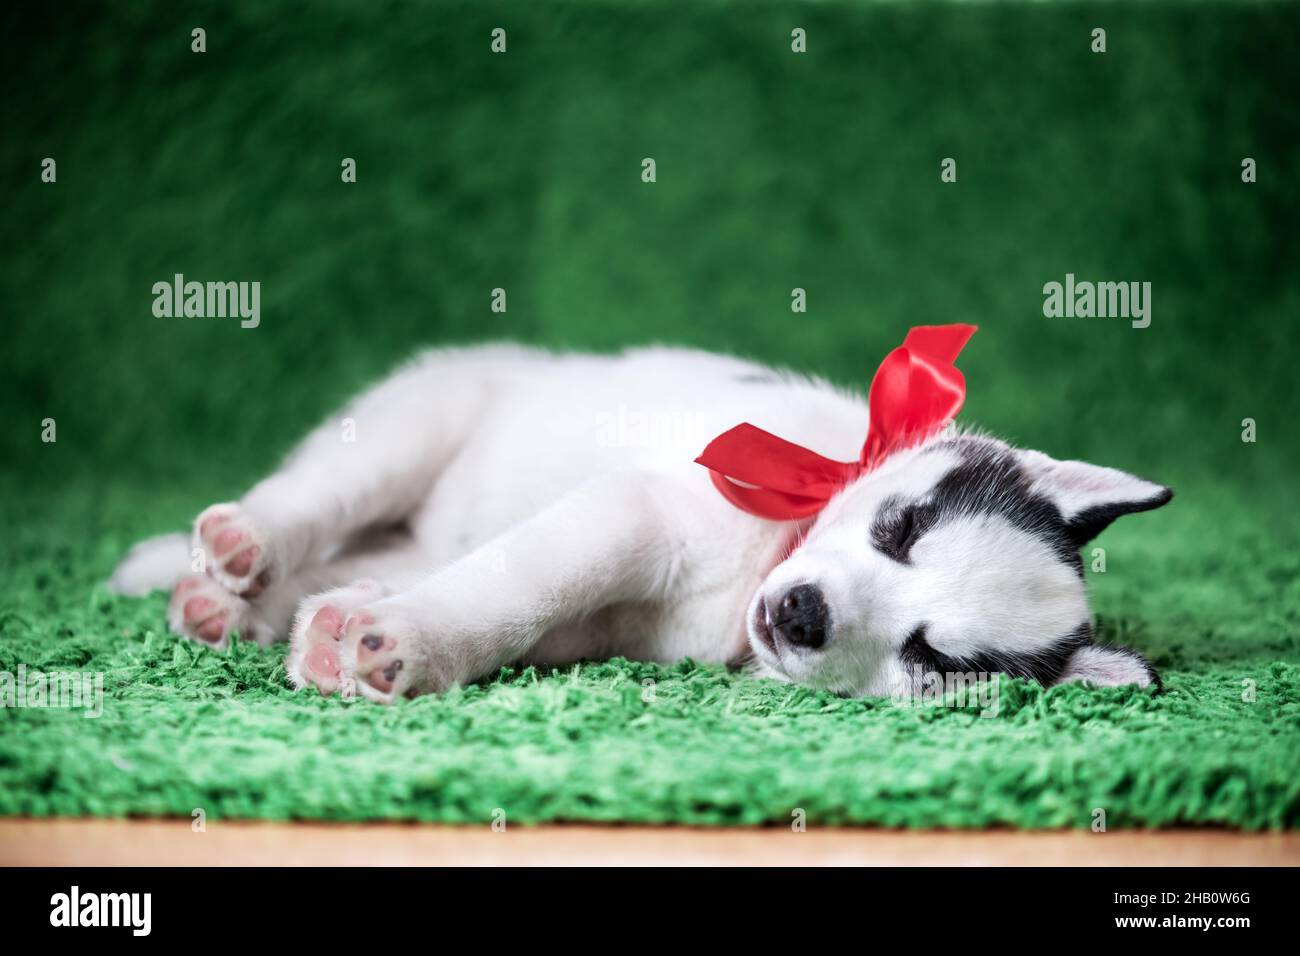 A small white dog puppy breed siberian husky with beautiful blue eyes lays on green carpet. Dogs and pet photography Stock Photo